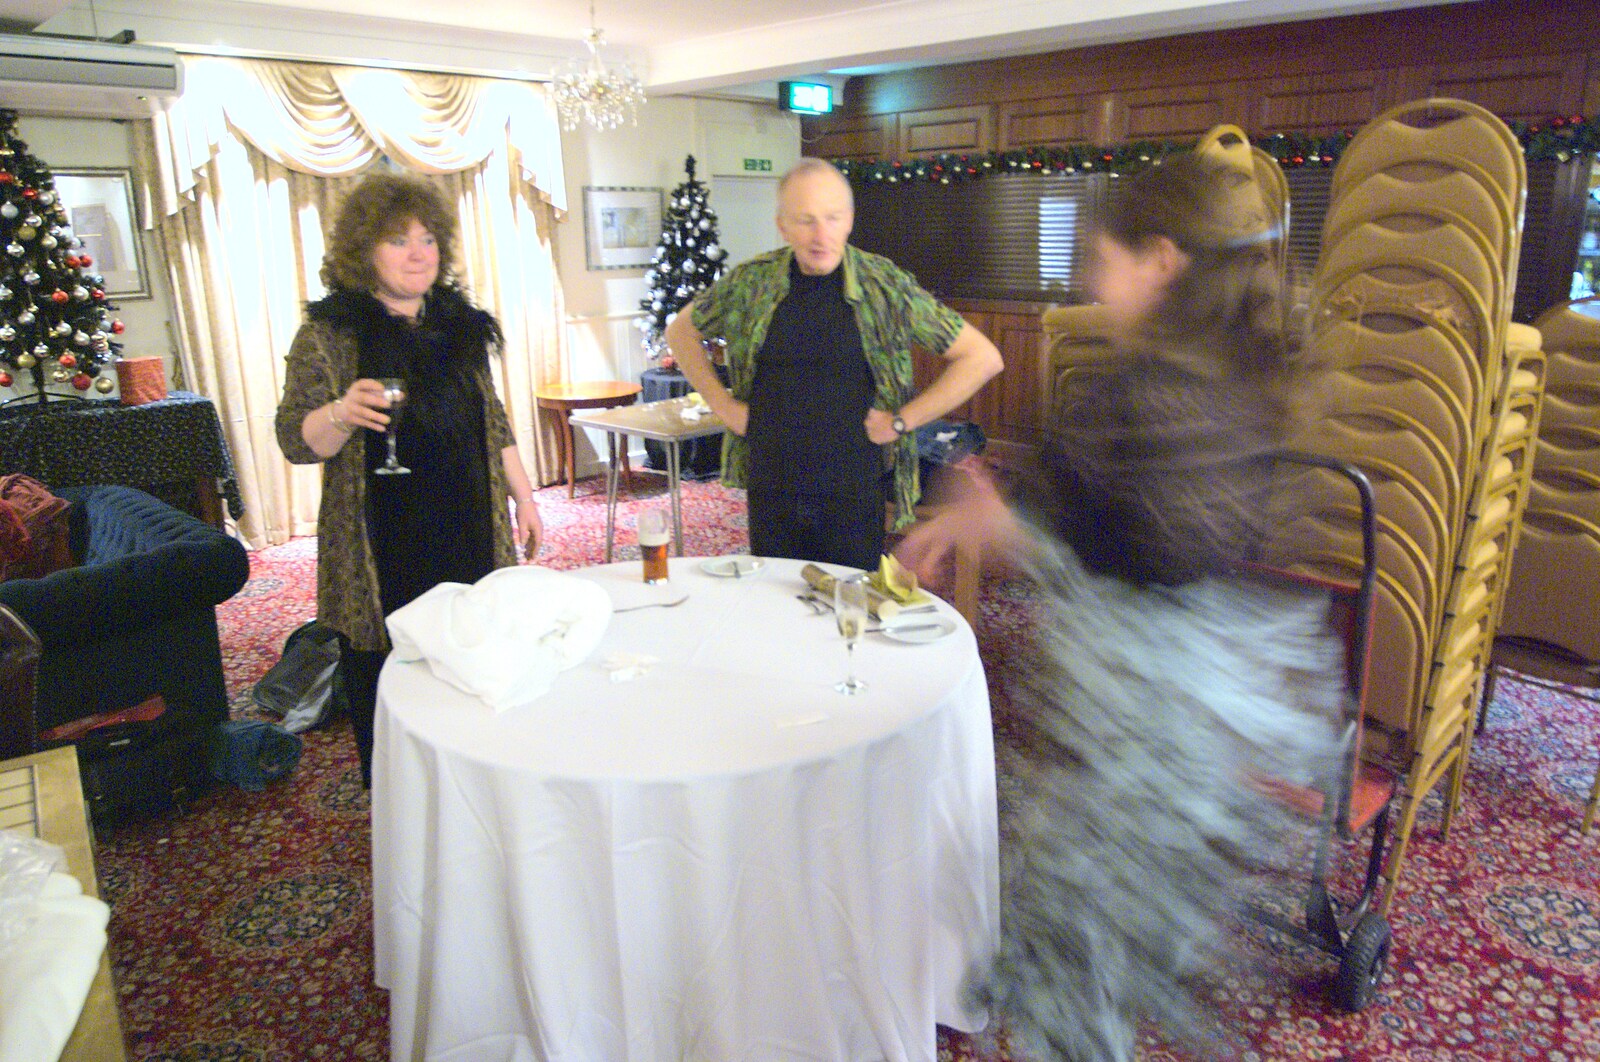 Isobel comes over to say hi from New Year's Eve With The BBs, Park Hotel, Diss, Norfolk - 31st December 2010